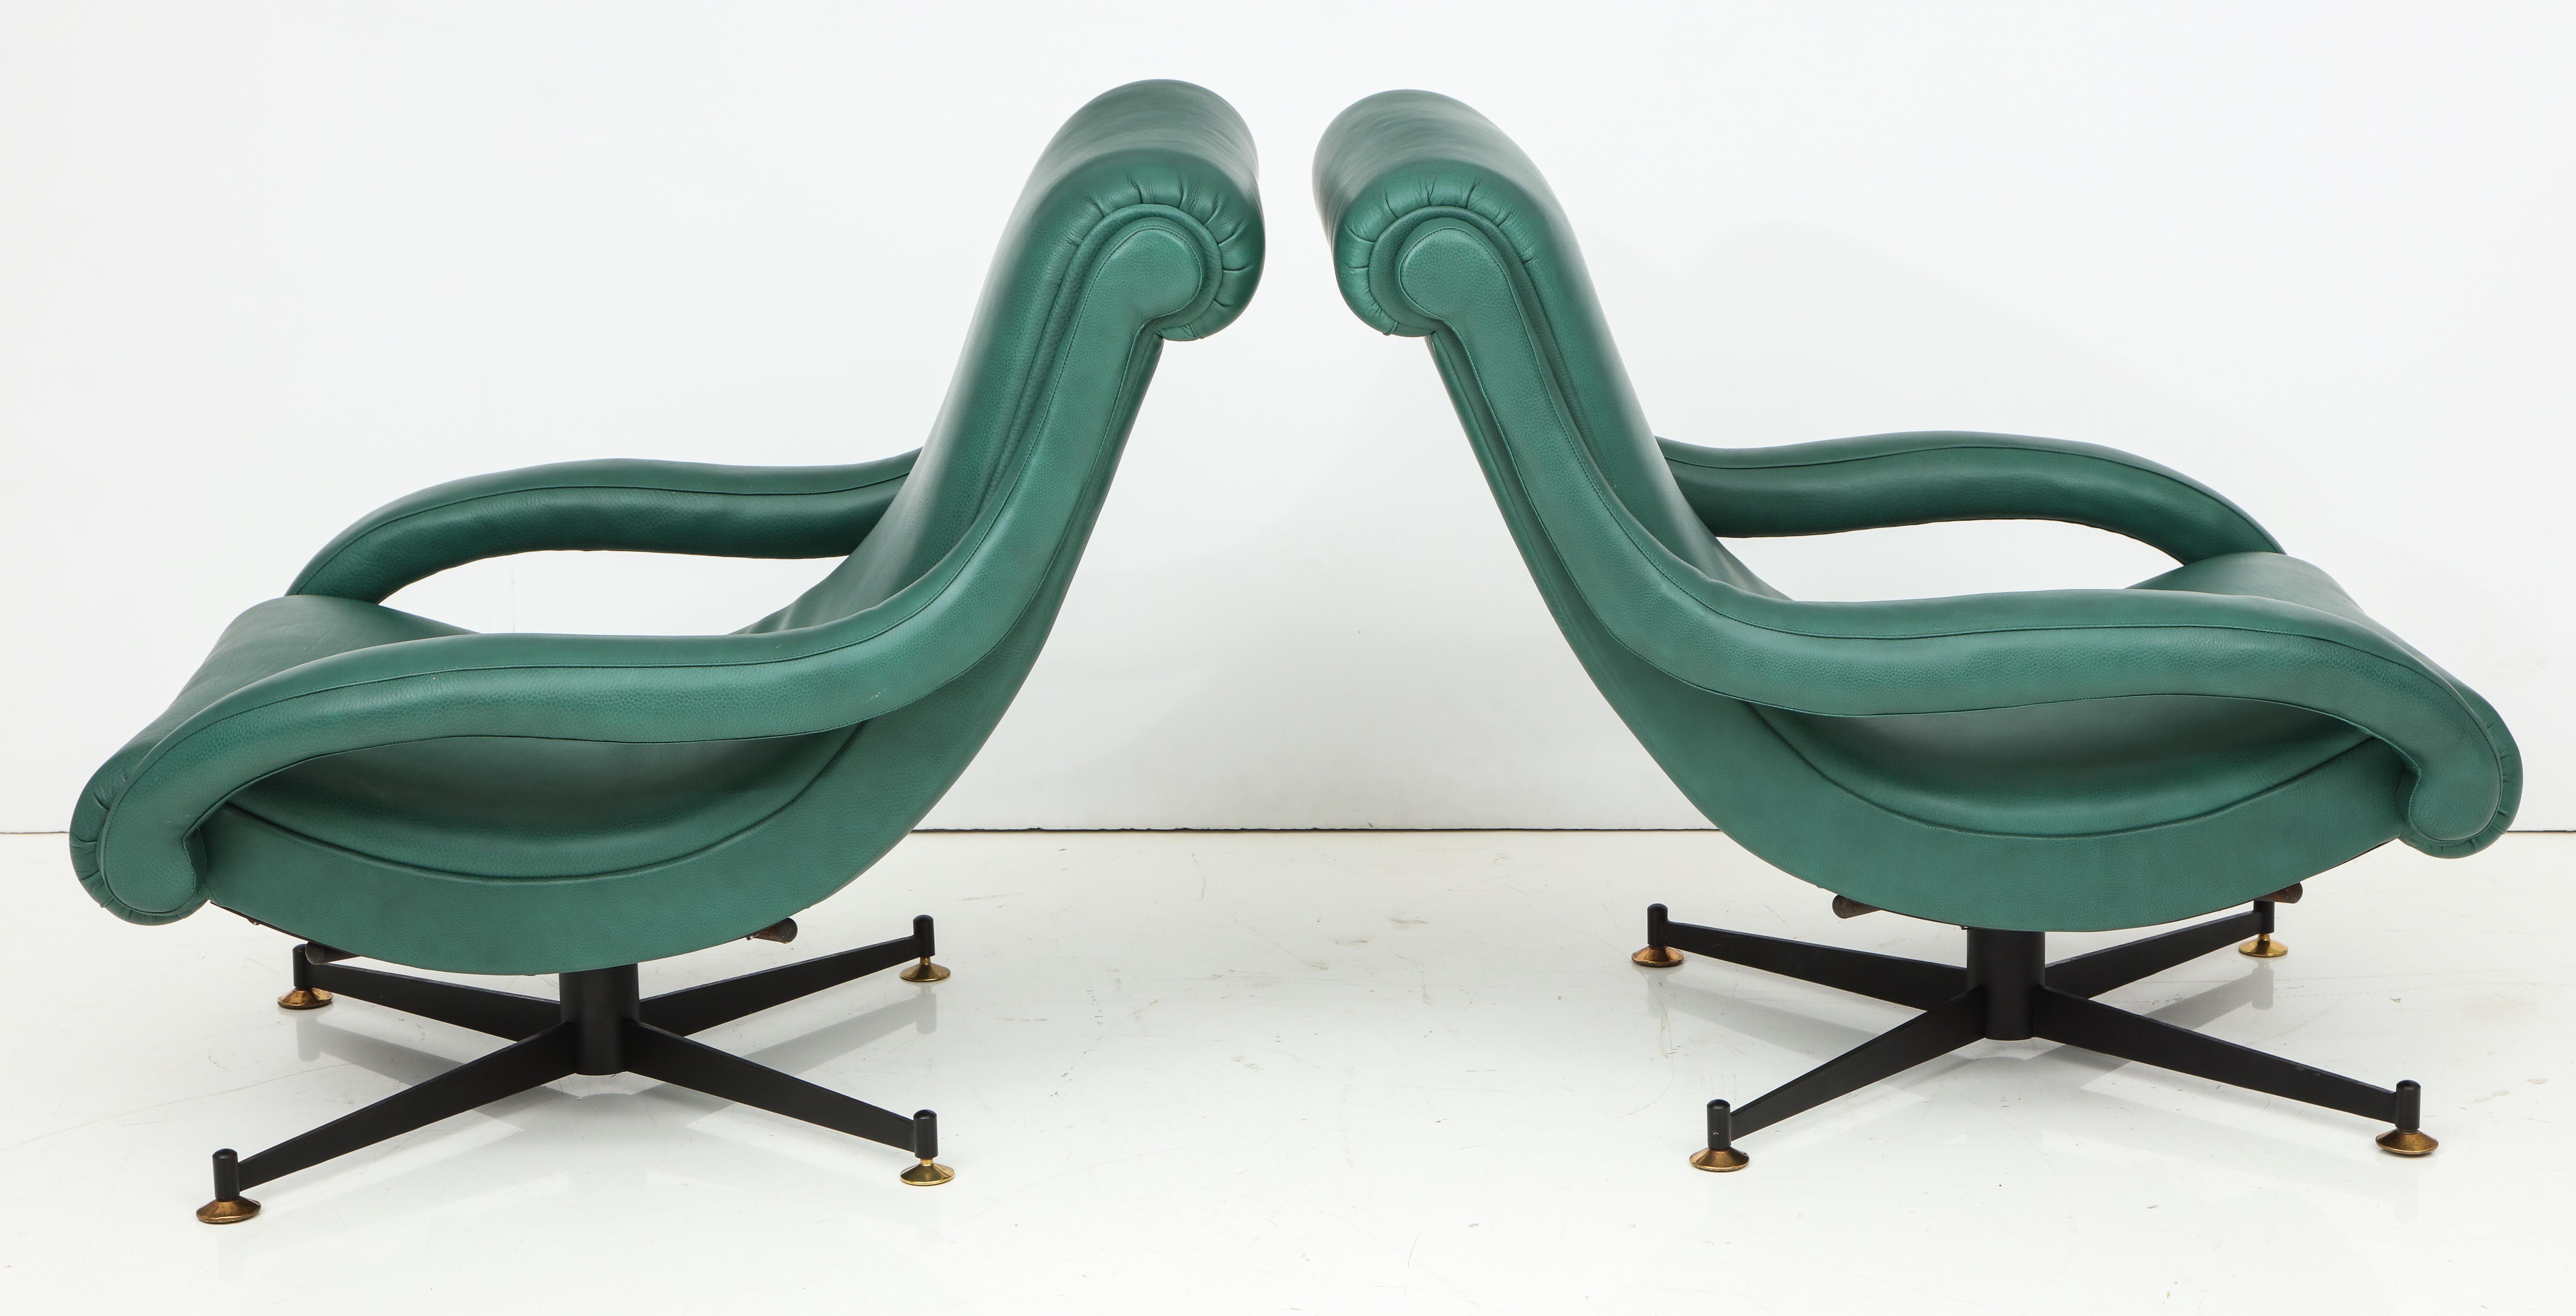 Pair of Lounge Chairs in Gucci Green Leather by Radice for Lenzi, c. 1950, Italy 4